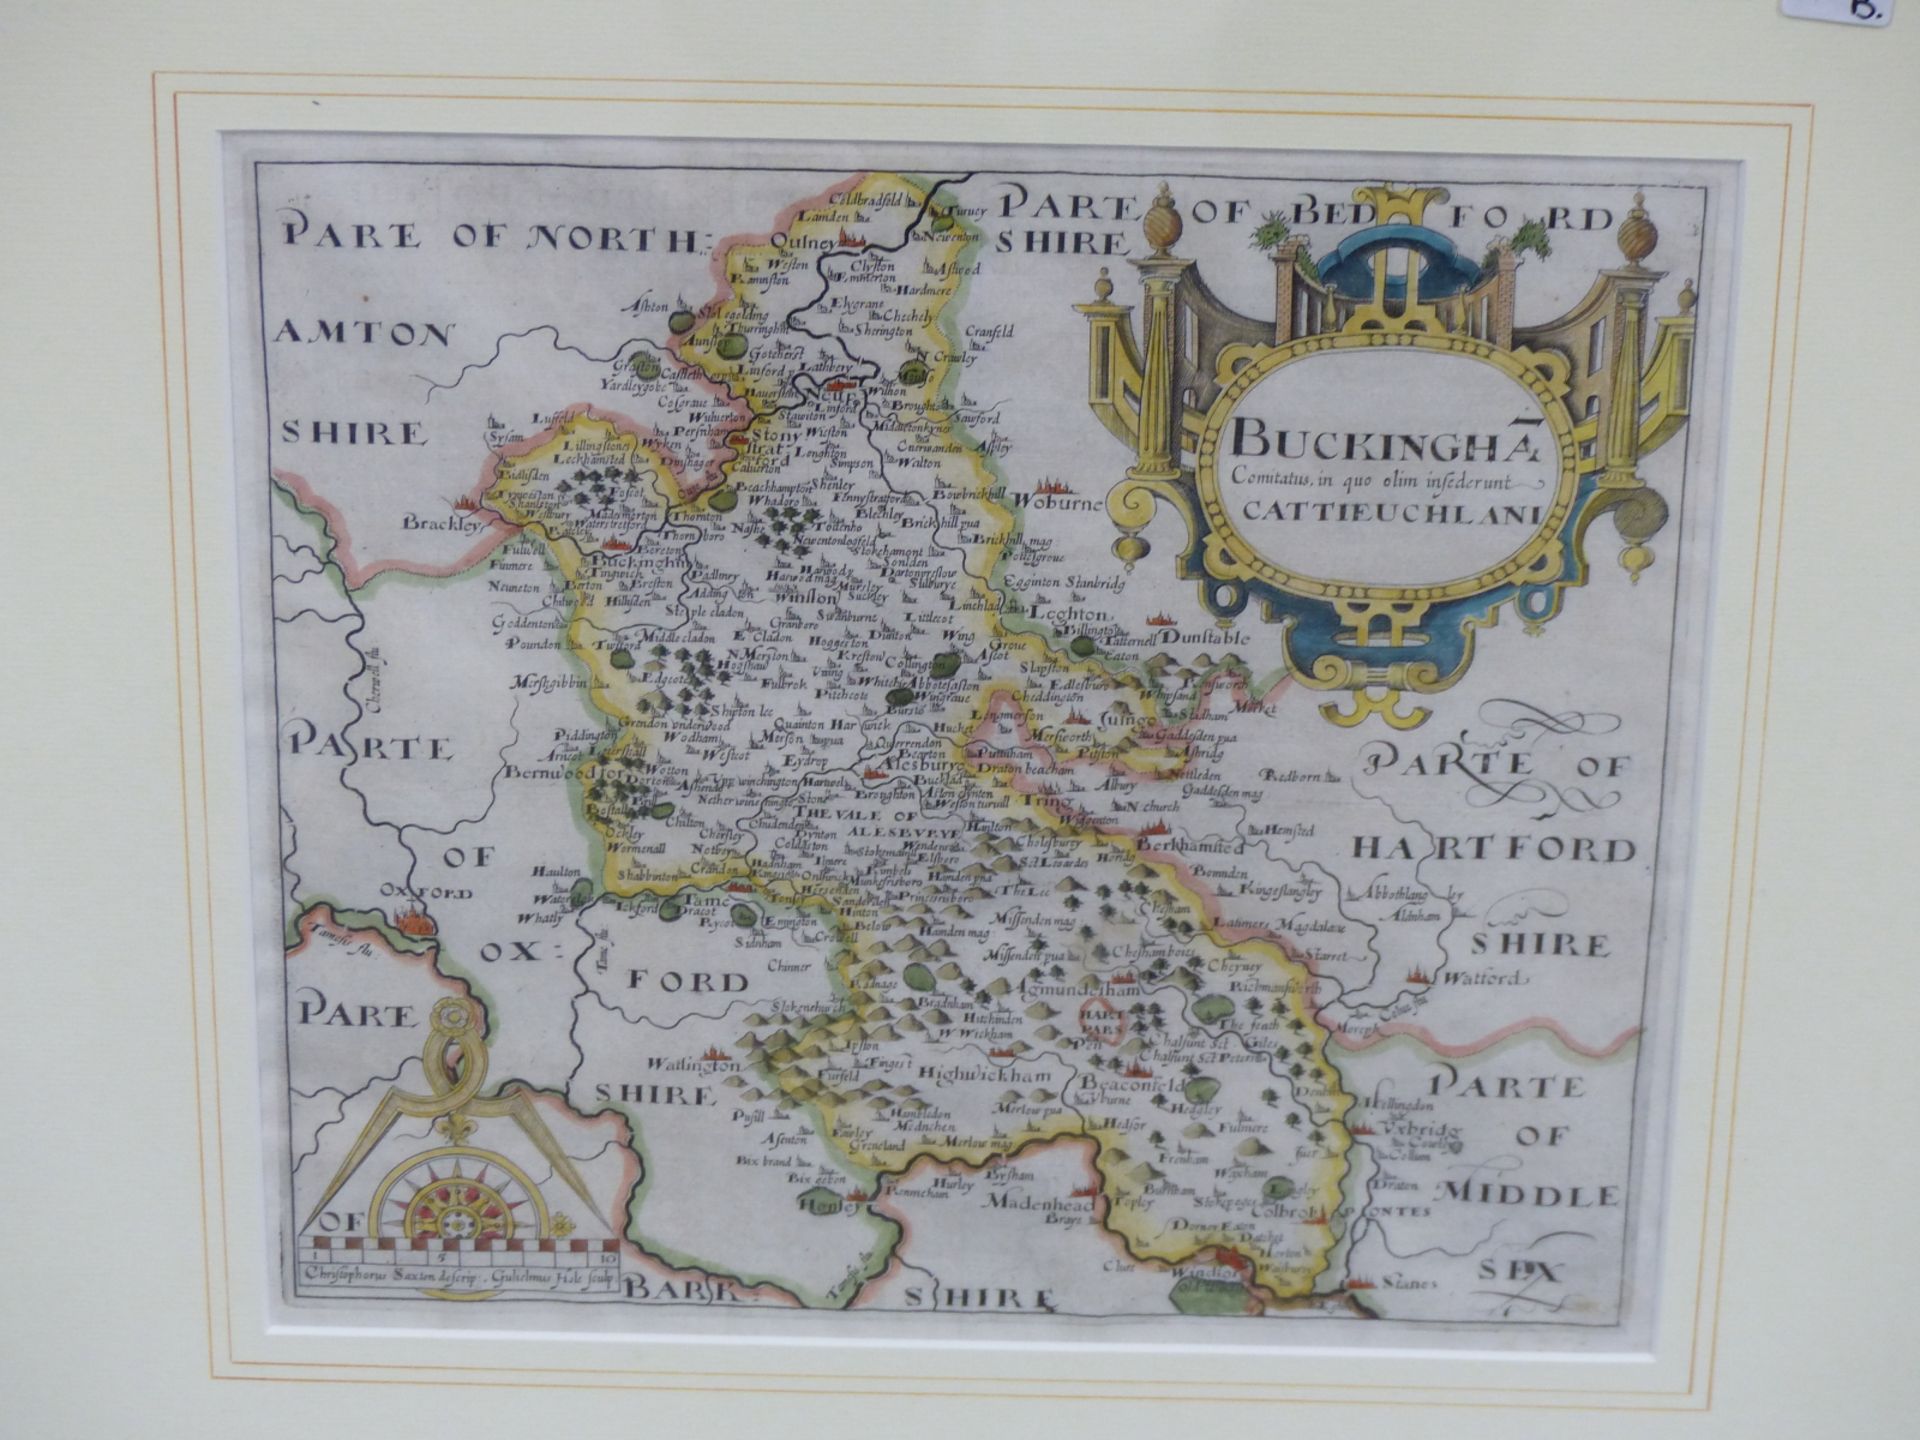 A RARE HAND COLOURED EARLY 17TH CENTURY MAP OF BUCKINGHAMSHIRE BY SAXTON & HOLE. C1610.